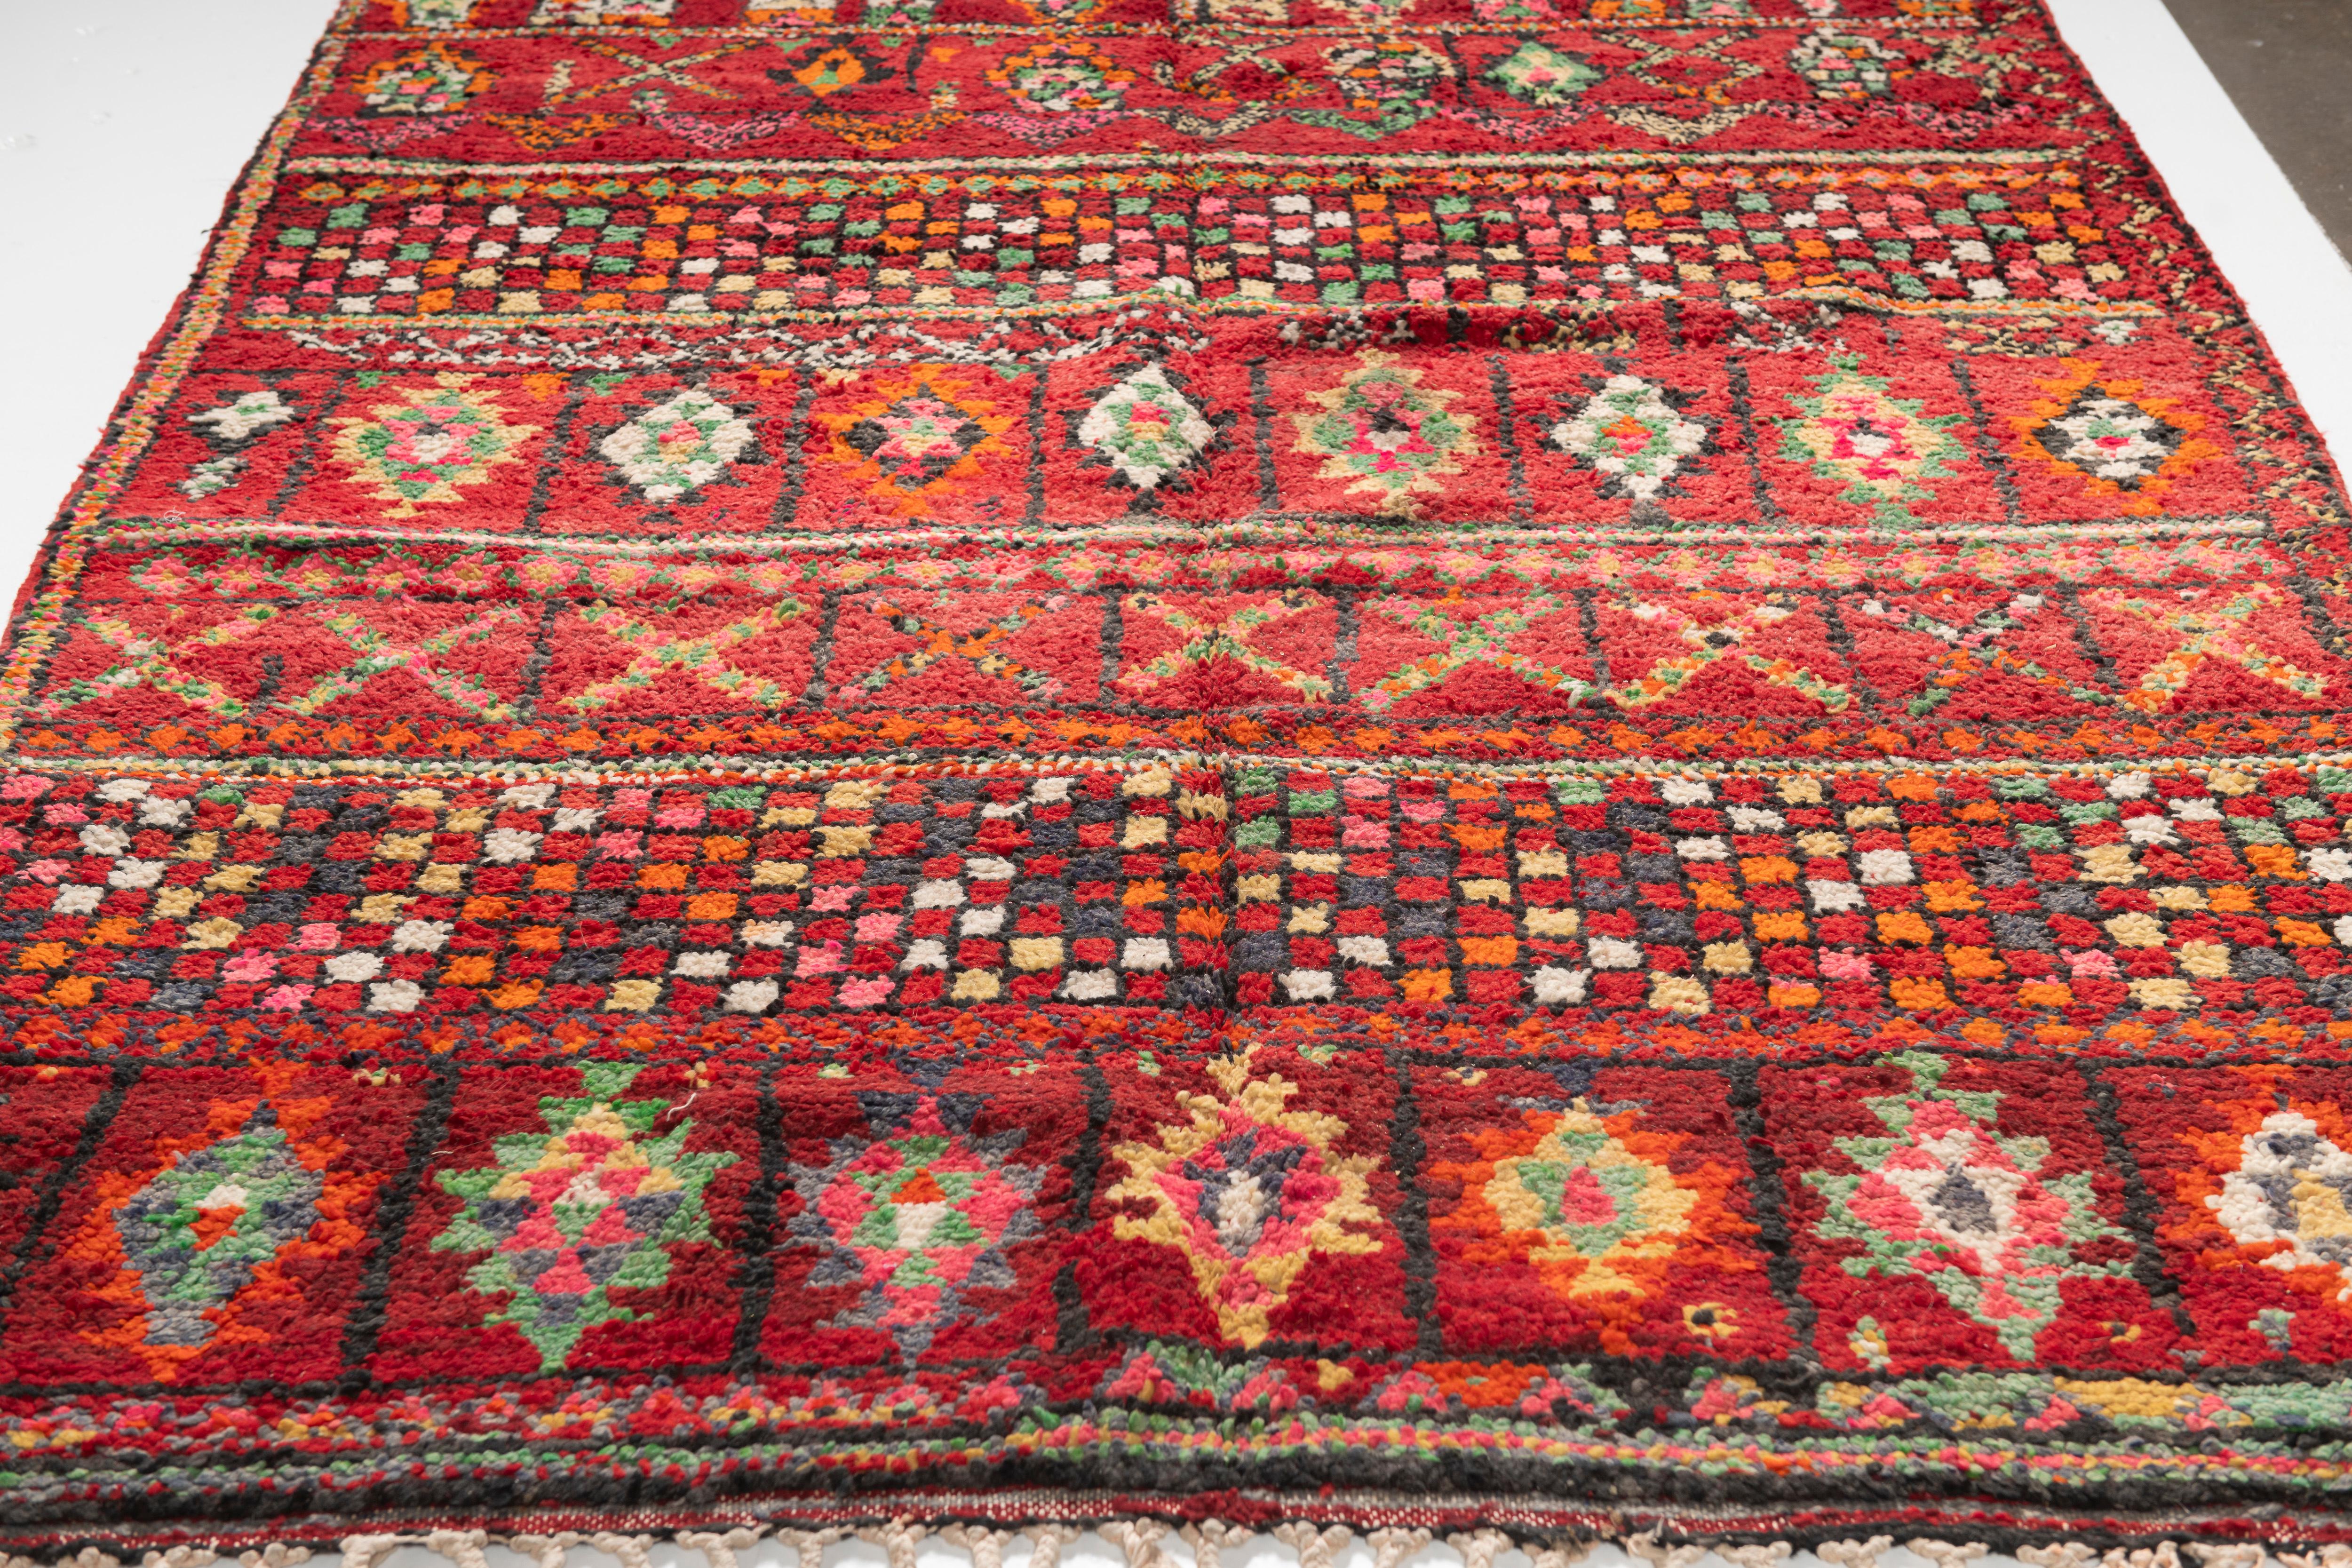 Vintage Moroccan Berber Zemmour Rug, 1920-1930s in deep red, orange, green, yellow, black and white, incorporating traditional geometric motifs in this hand-knotted, hand-spun sheep wool rug. Thick and shaggy pile make this a beautiful grounding